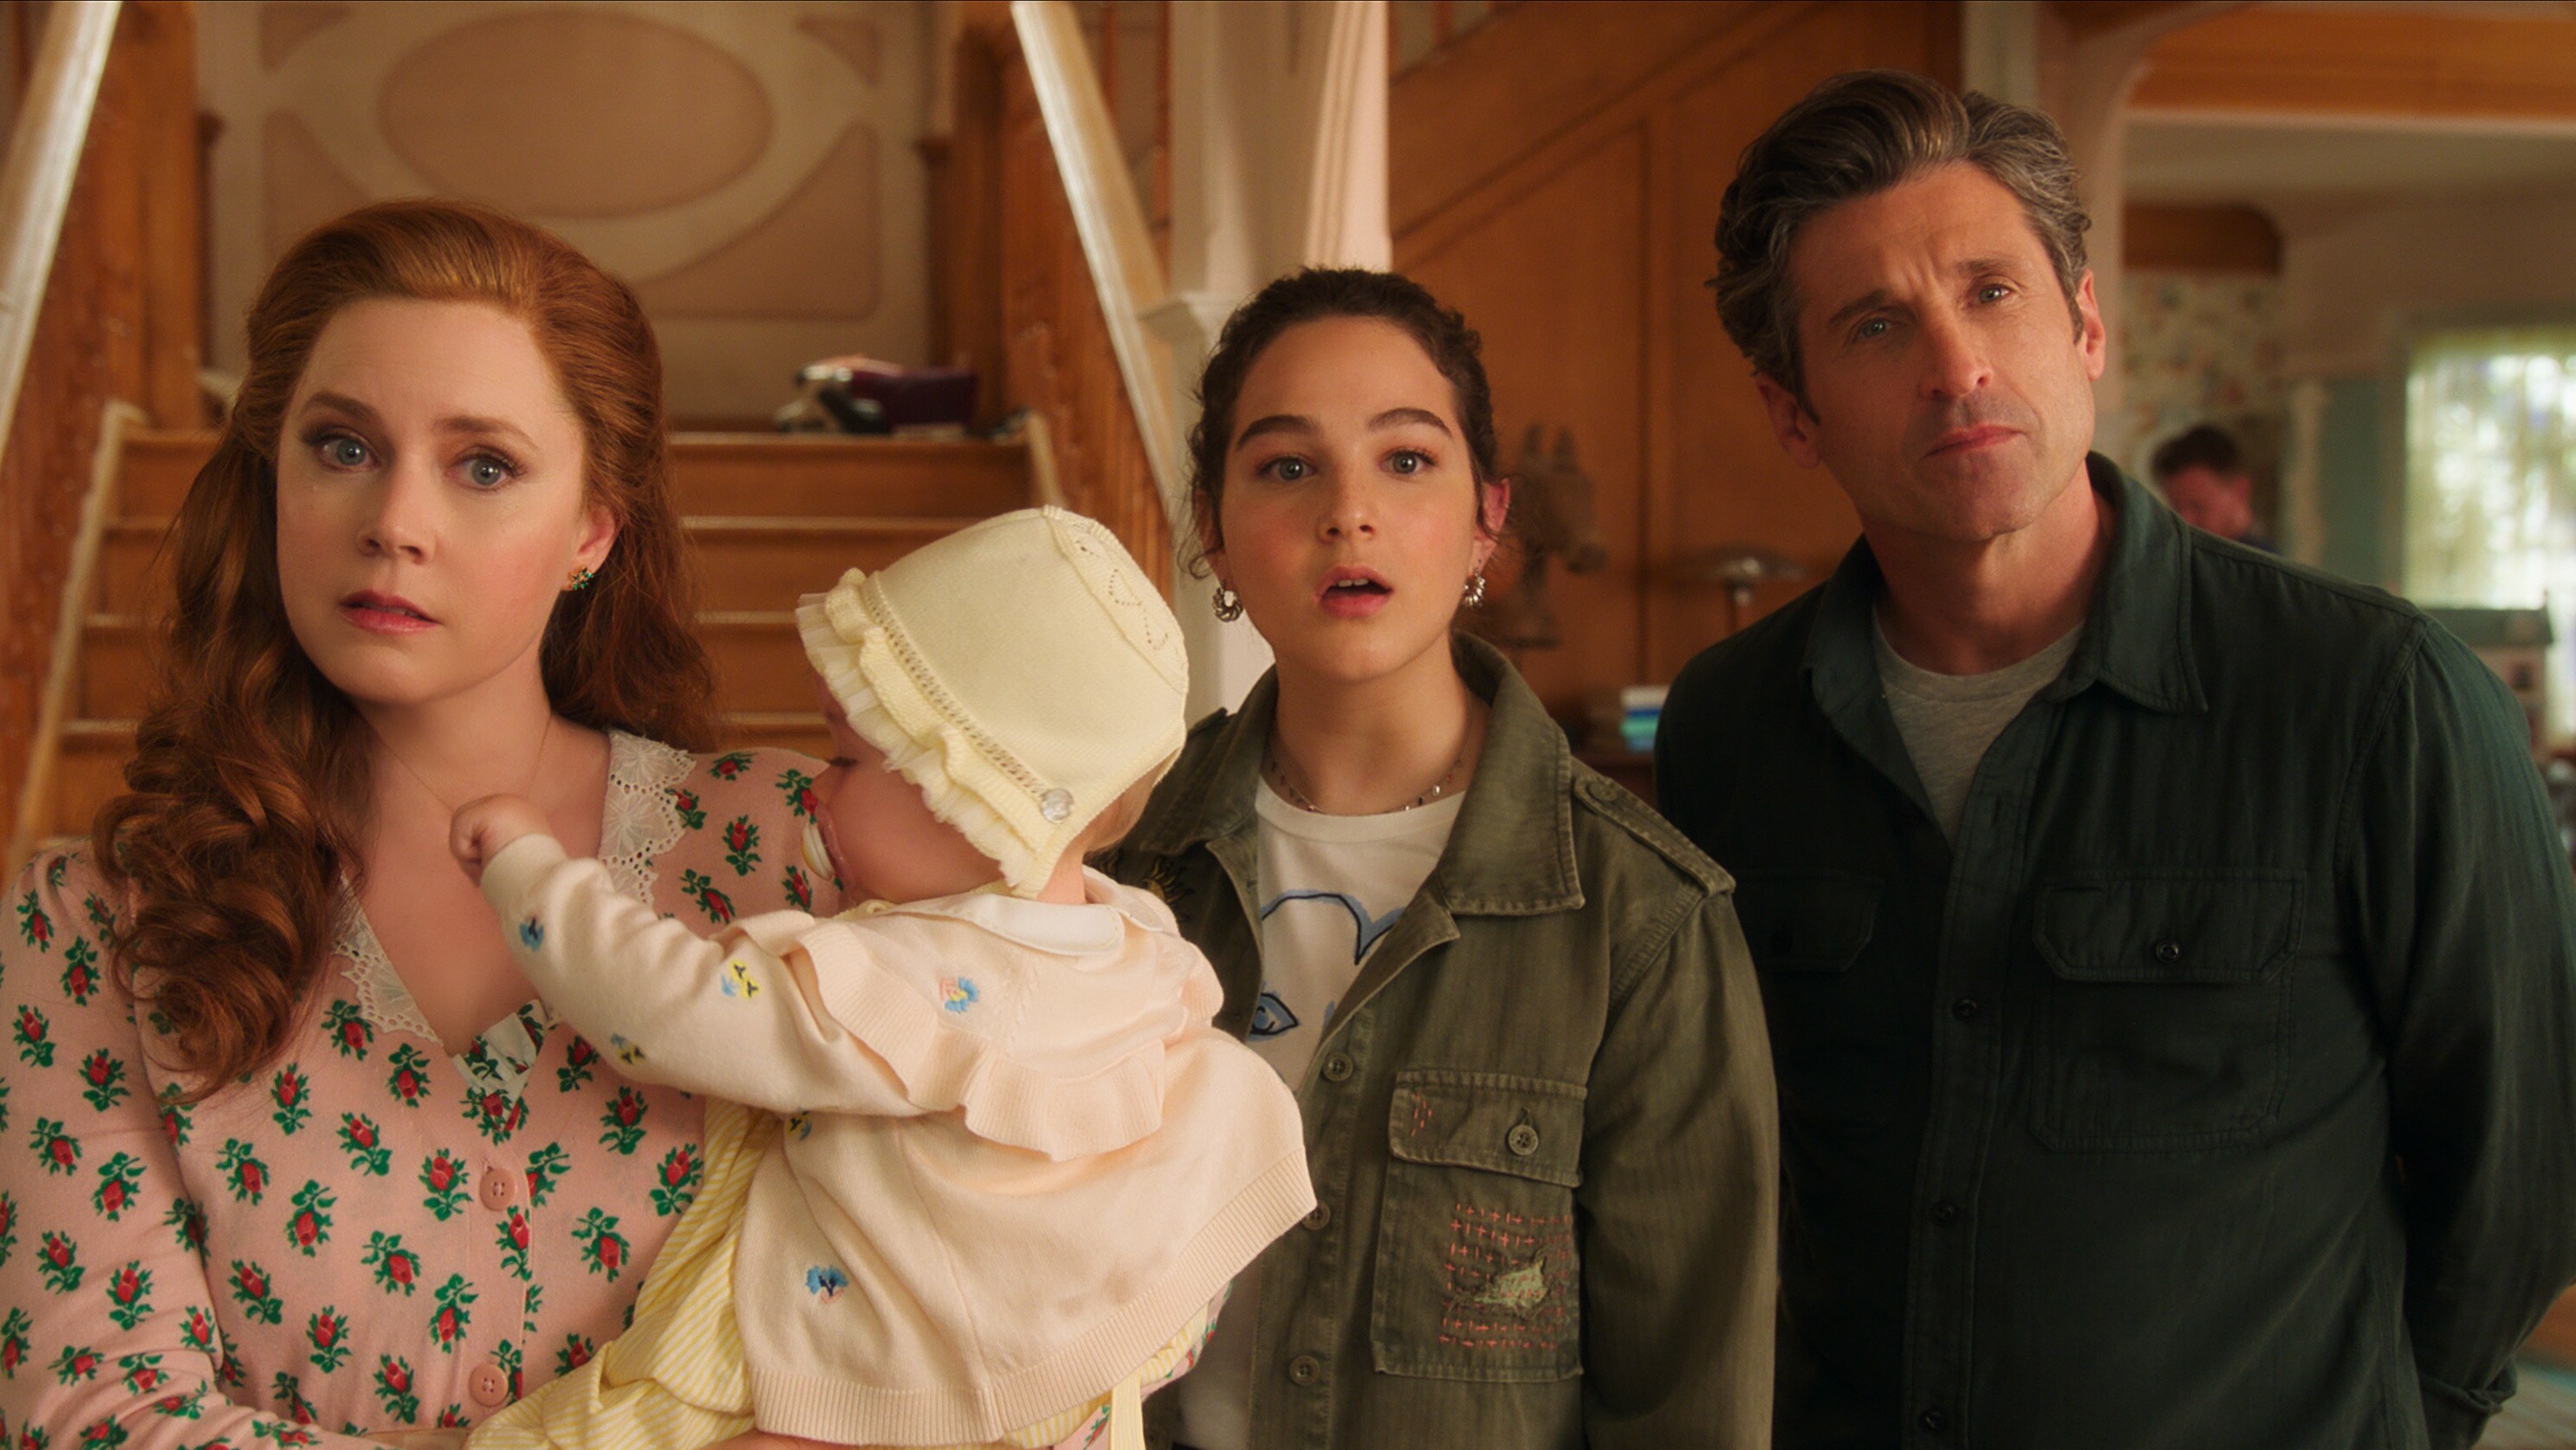 (L-R): Amy Adams as Giselle, Sofia (played by Mila & Lara Jackson),  Gabriella Baldacchino as Morgan Philip, and Patrick Dempsey as Robert Philip in Disney's live-action DISENCHANTED, exclusively on Disney+. Courtesy of Disney Enterprises; Inc. © 2022 Disney Enterprises, Inc. All Rights Reserved.